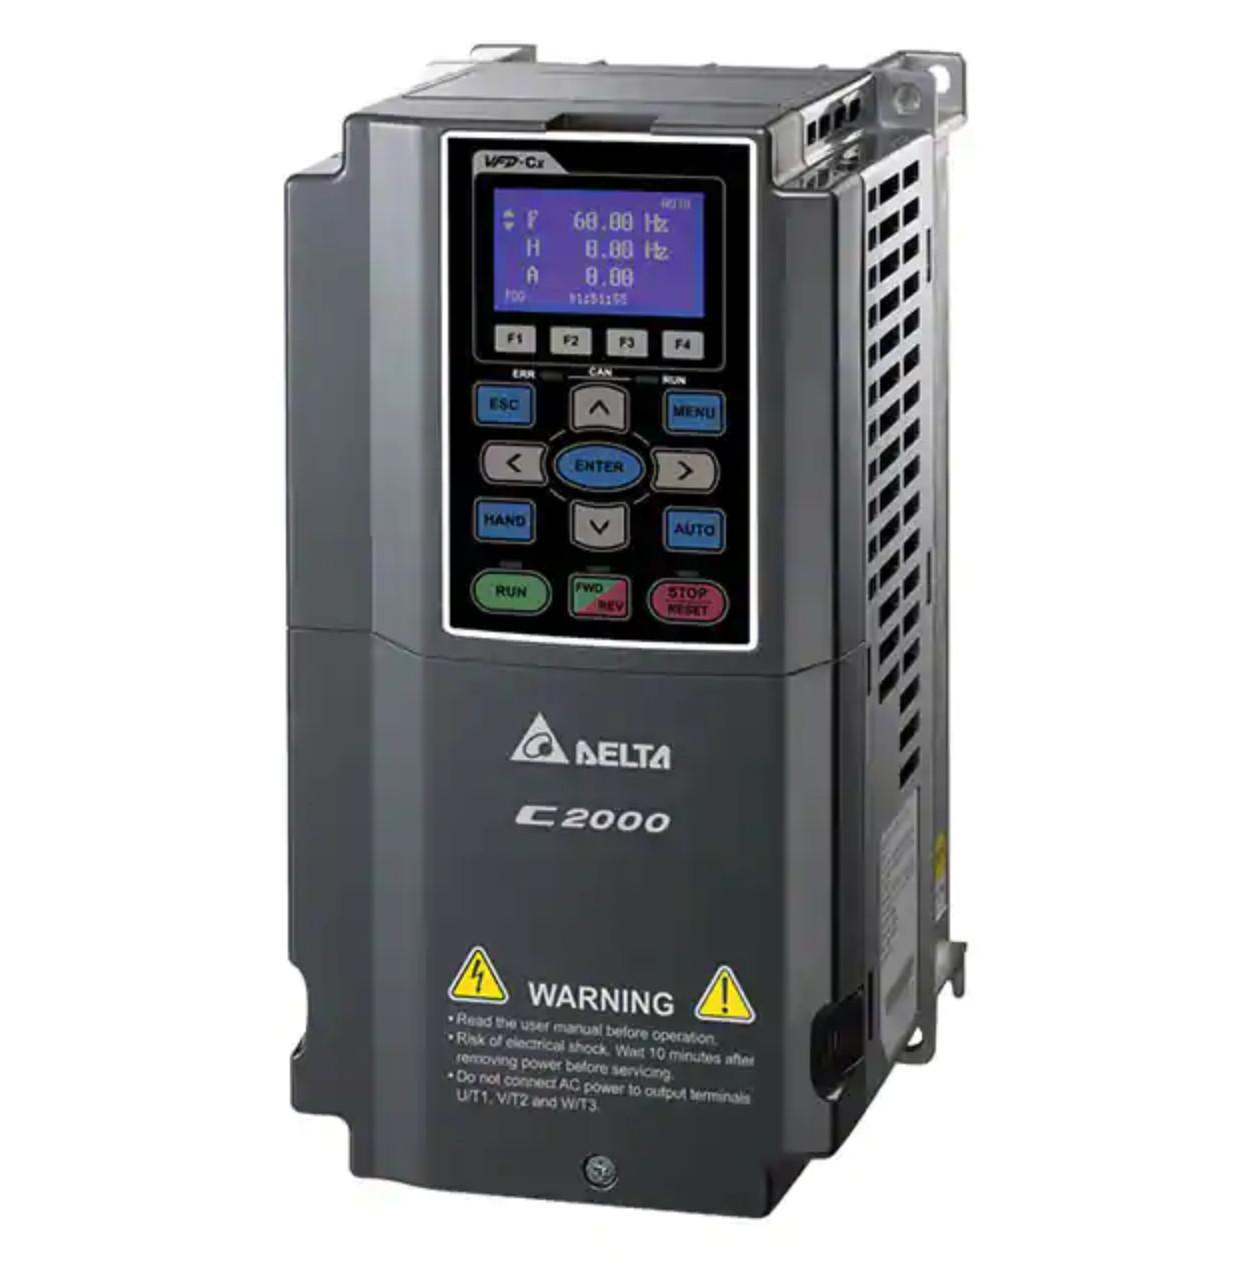 Delta VFD007C4EA-21 Variable Frequency Drive, 3 phase, 460 VAC build-in EMI Input, 1 HP, frame A, wall mount, IP20, NEMA 1